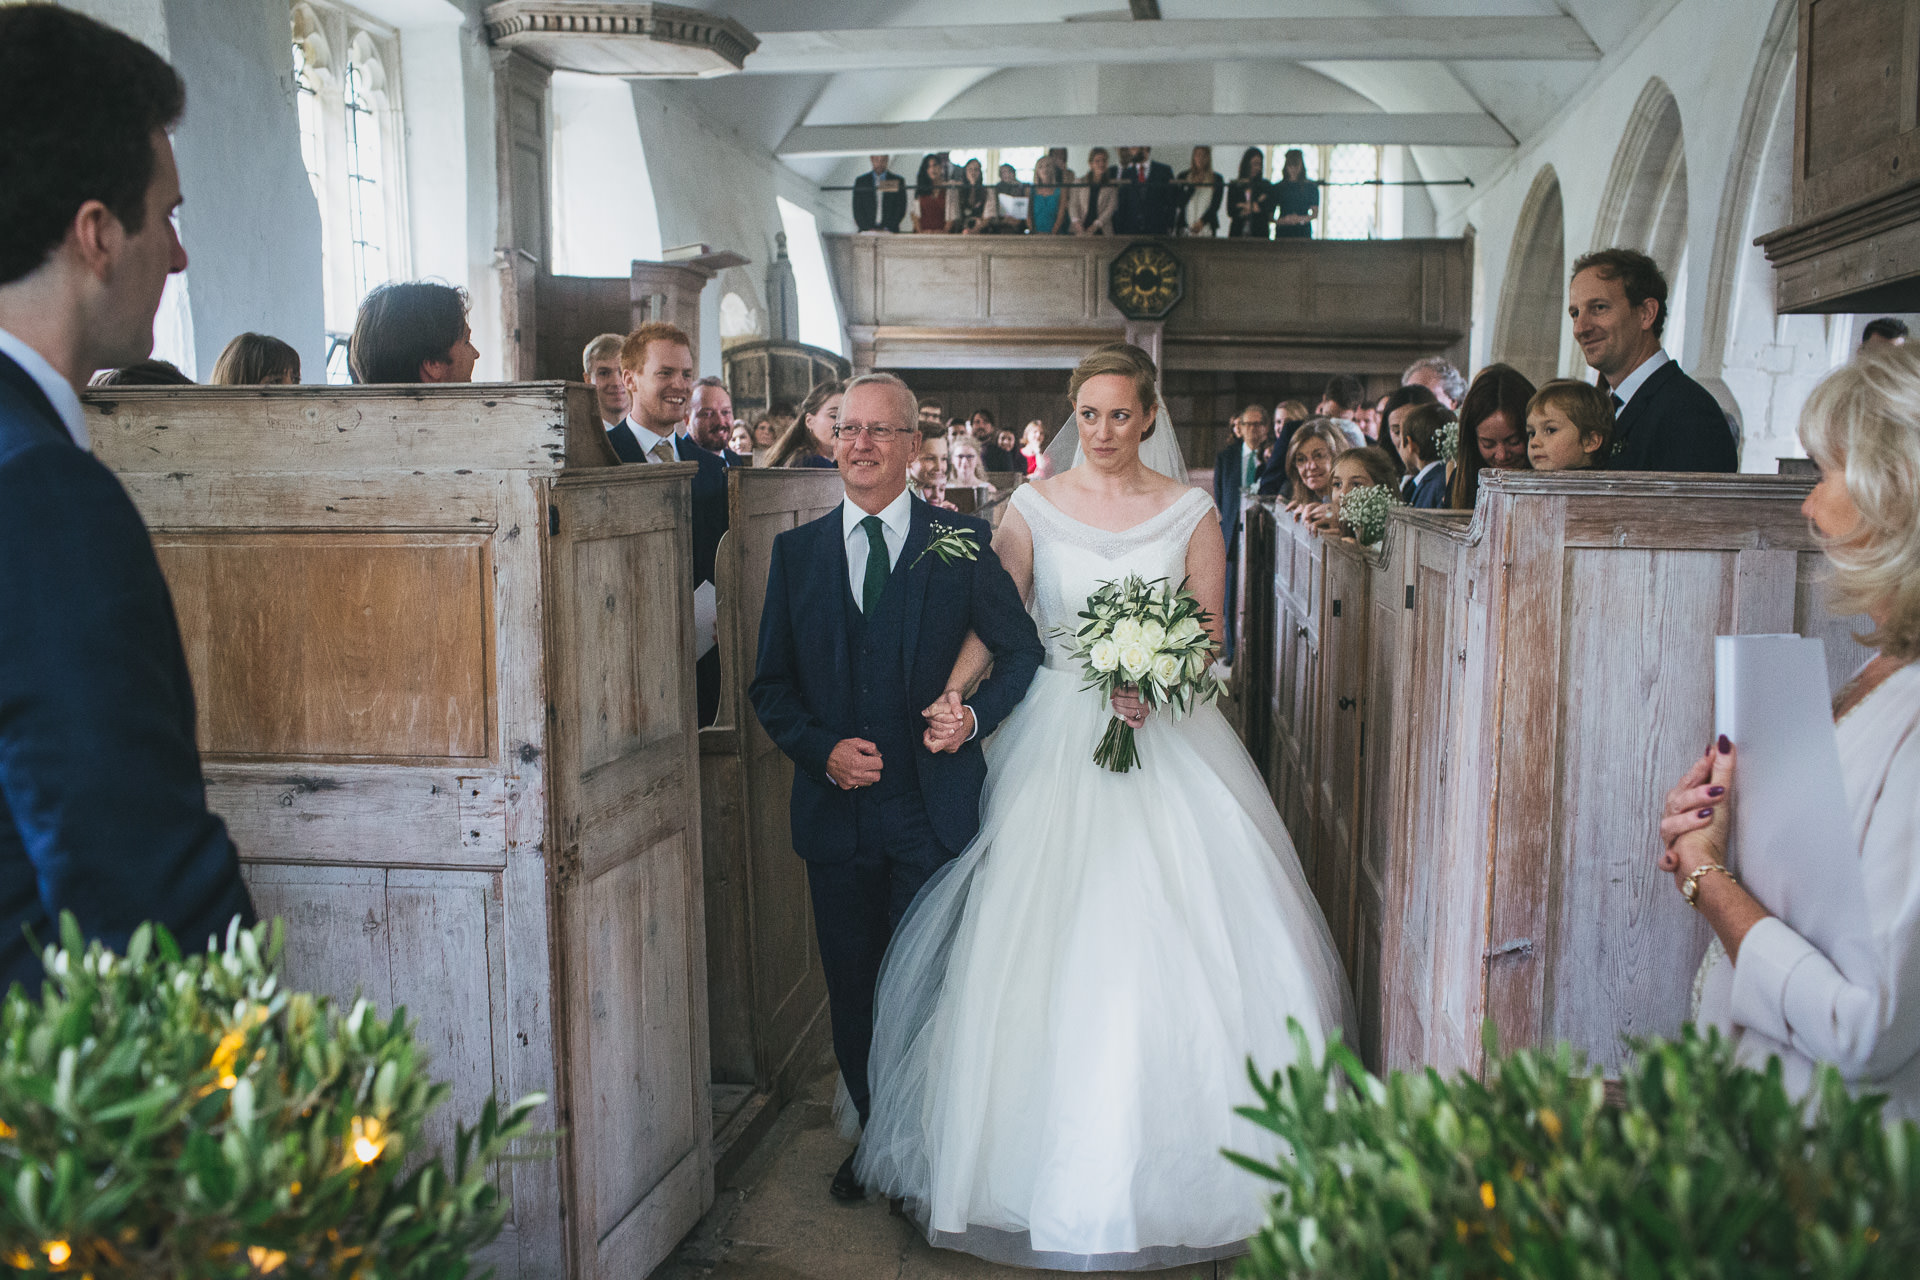 Bride and her father walking up the aisle at humanist wedding ceremony in a disused church